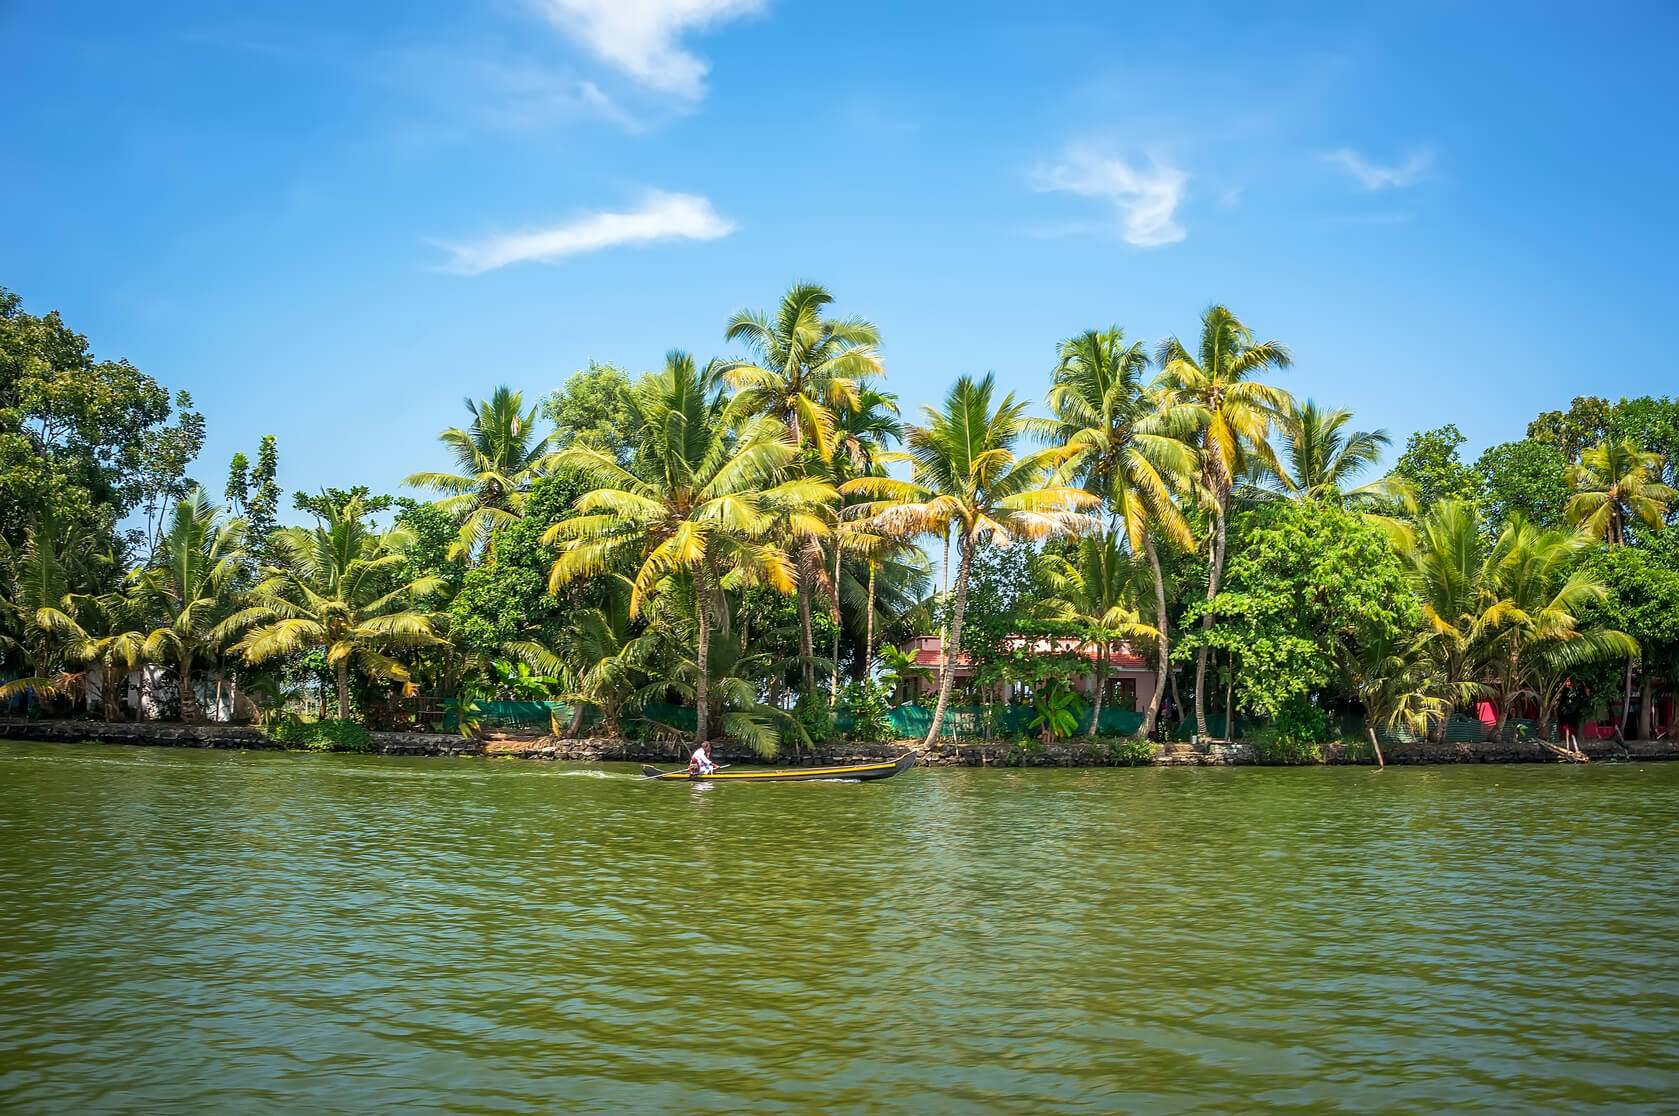 panoramic view with Coconut trees and fisherman house, backwaters landscape of Alleppey, Kerala, India